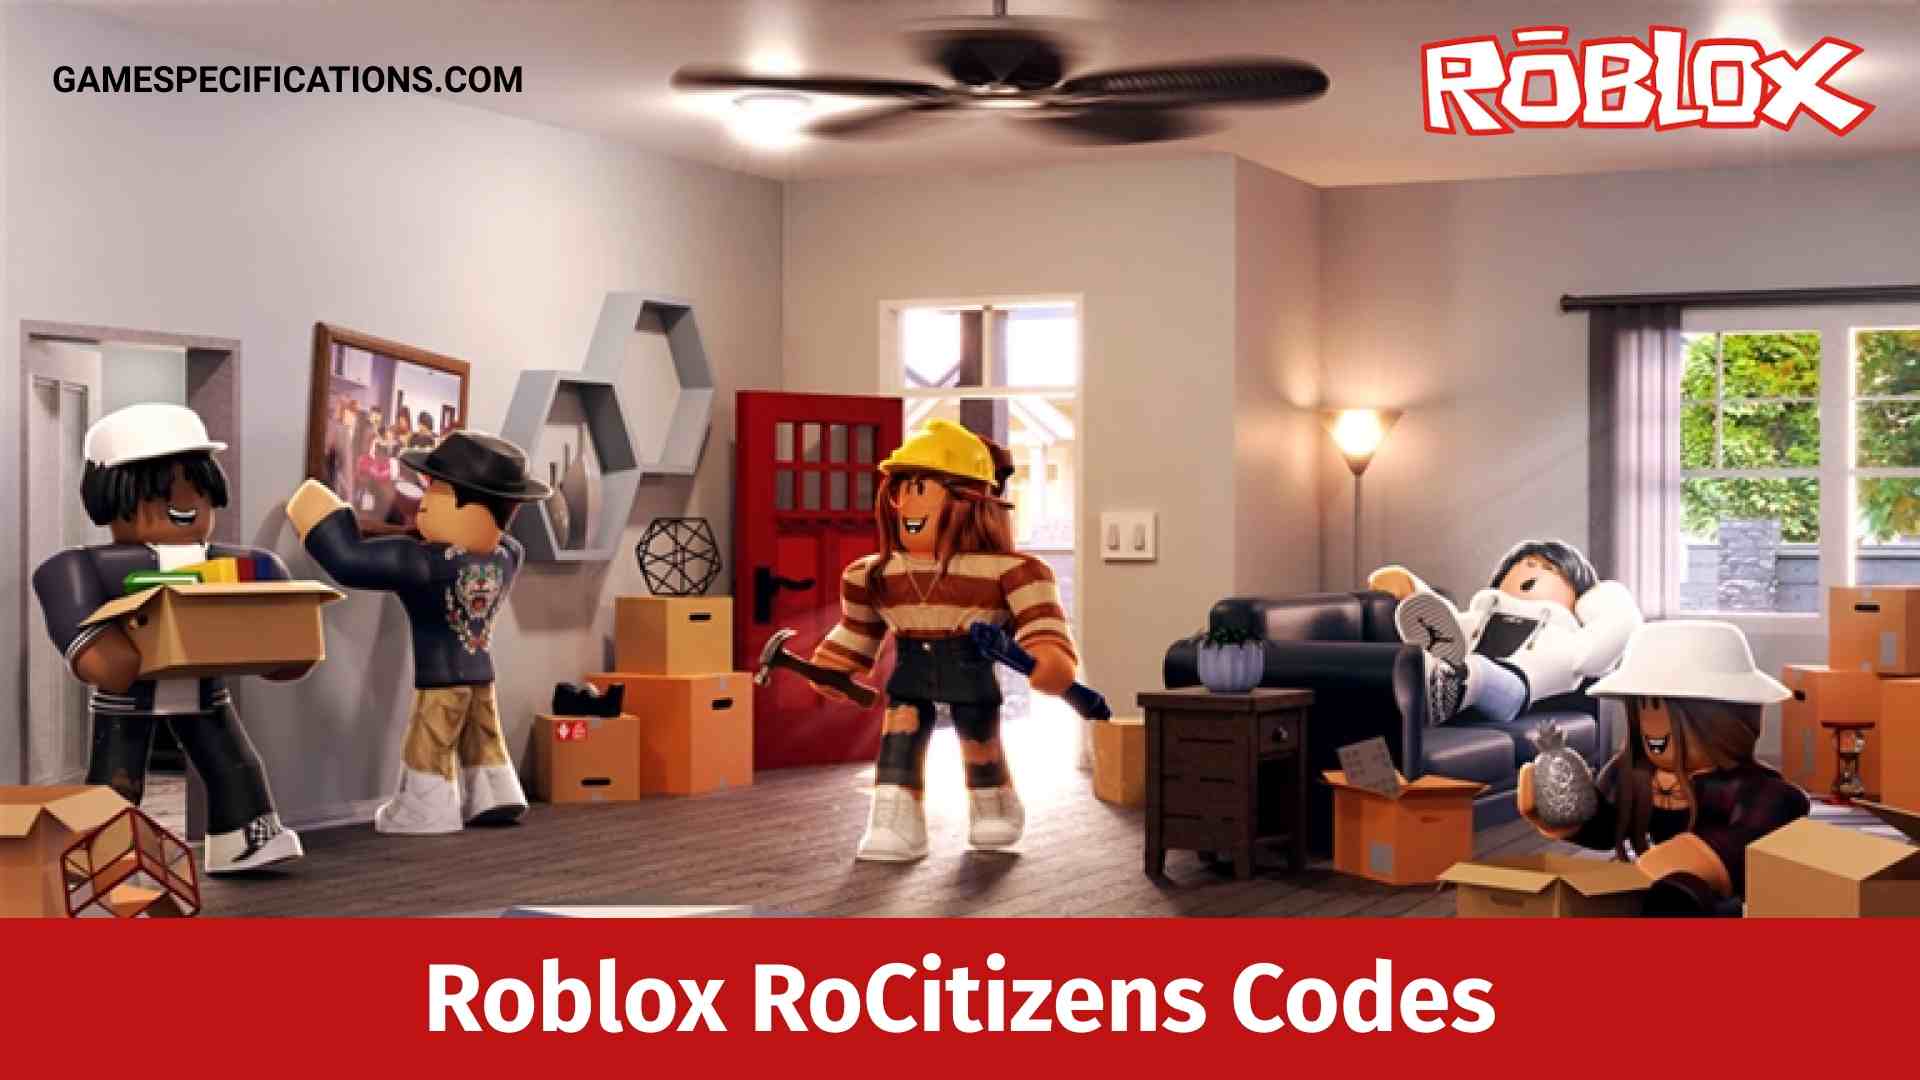 28 Working Roblox Rocitizens Codes July 2021 Game Specifications - just mk codes roblox rocitizens codes